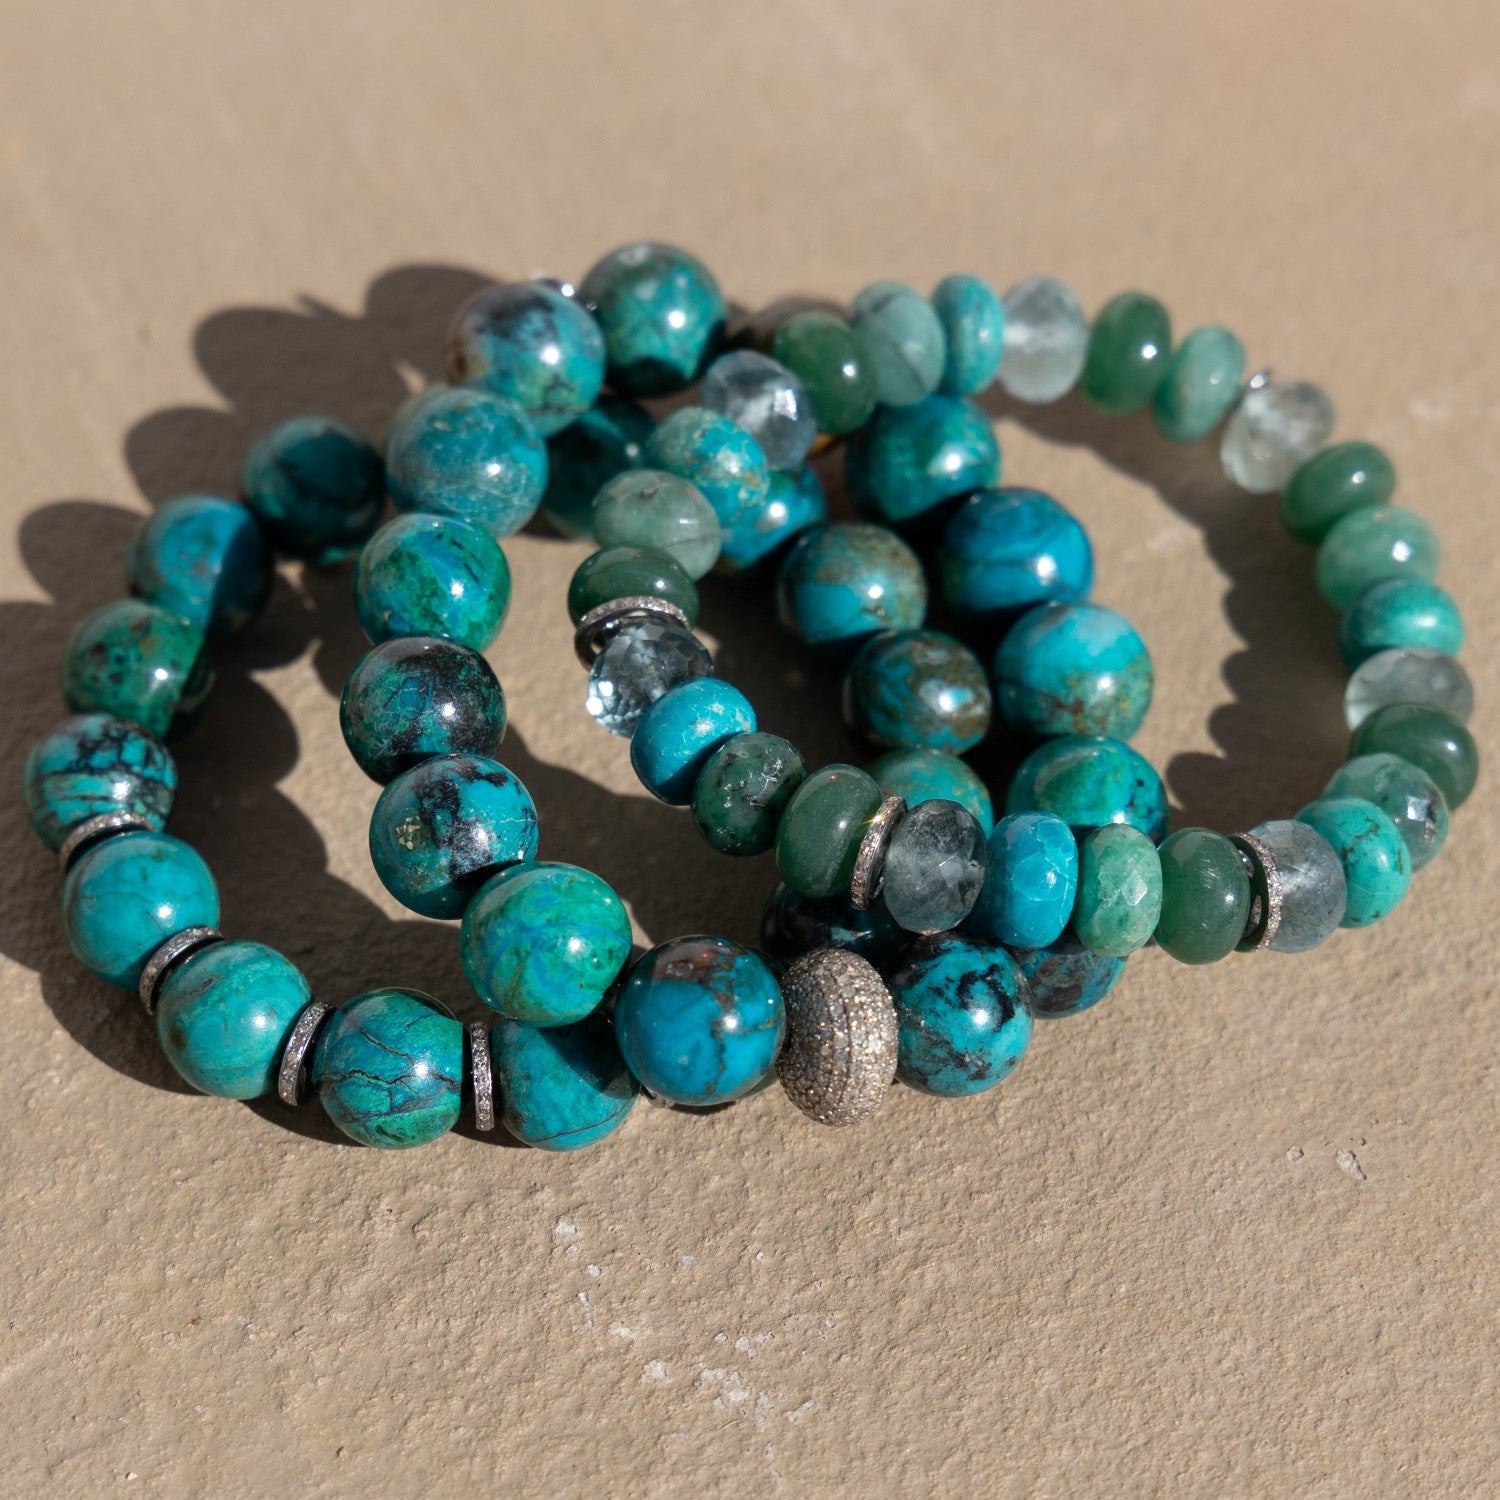 Green Gemstone Chrysocolla Bracelet at Rs 200 in Indore | ID: 26160565655